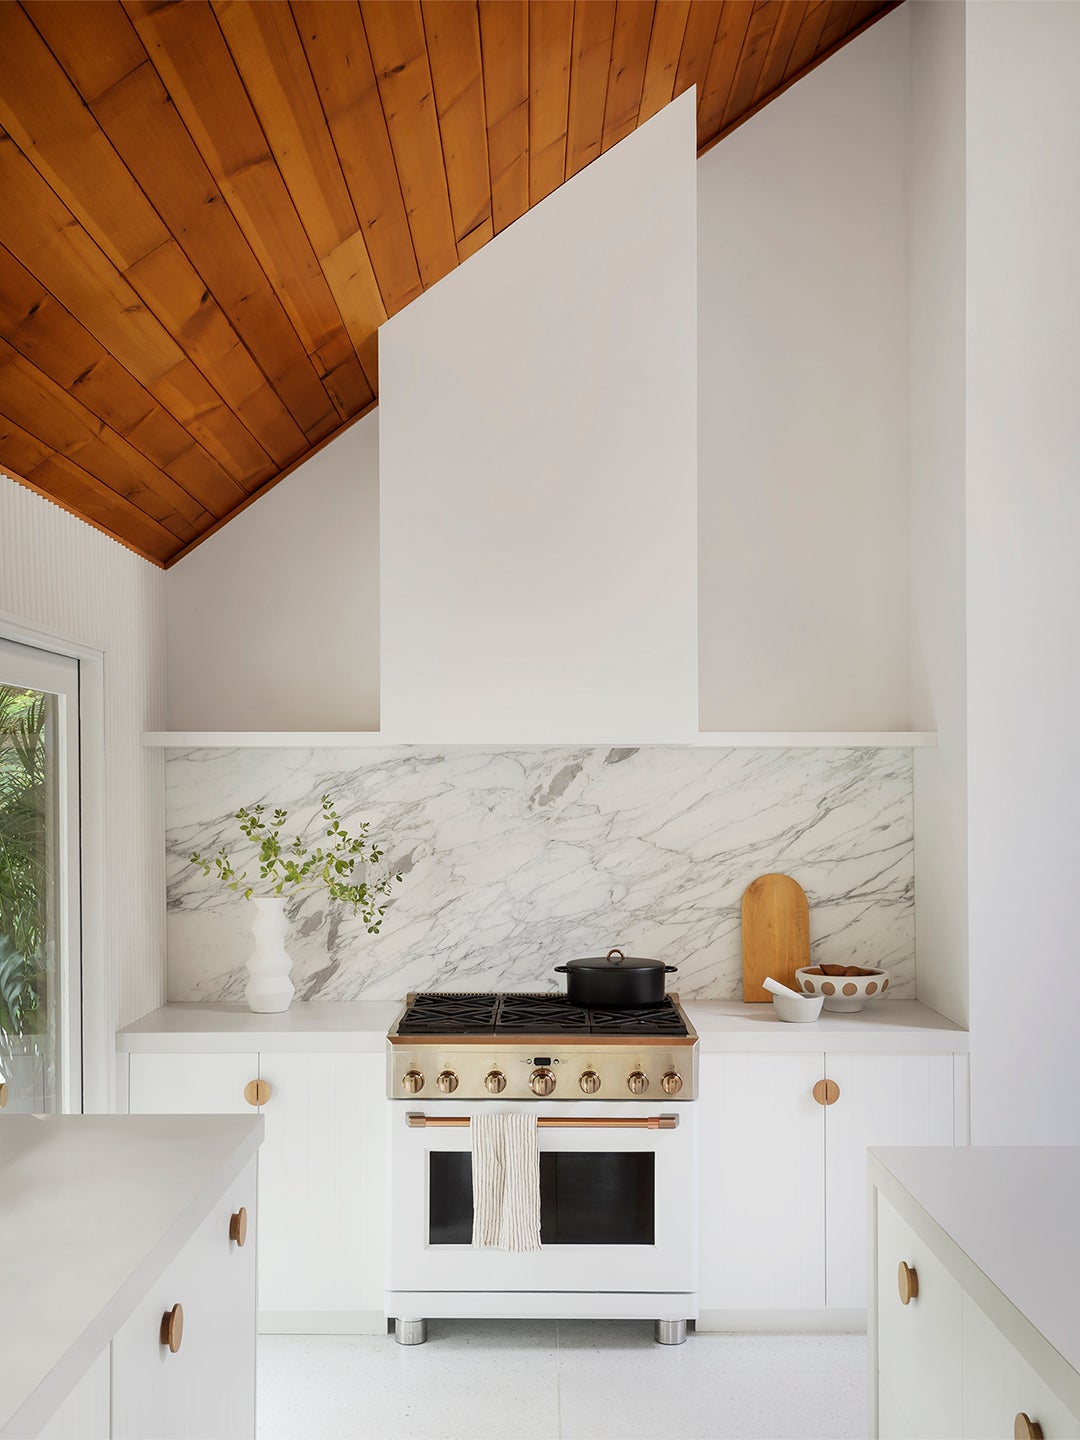 These Backsplash Ideas Bring Out the Best of White Kitchen Cabinets